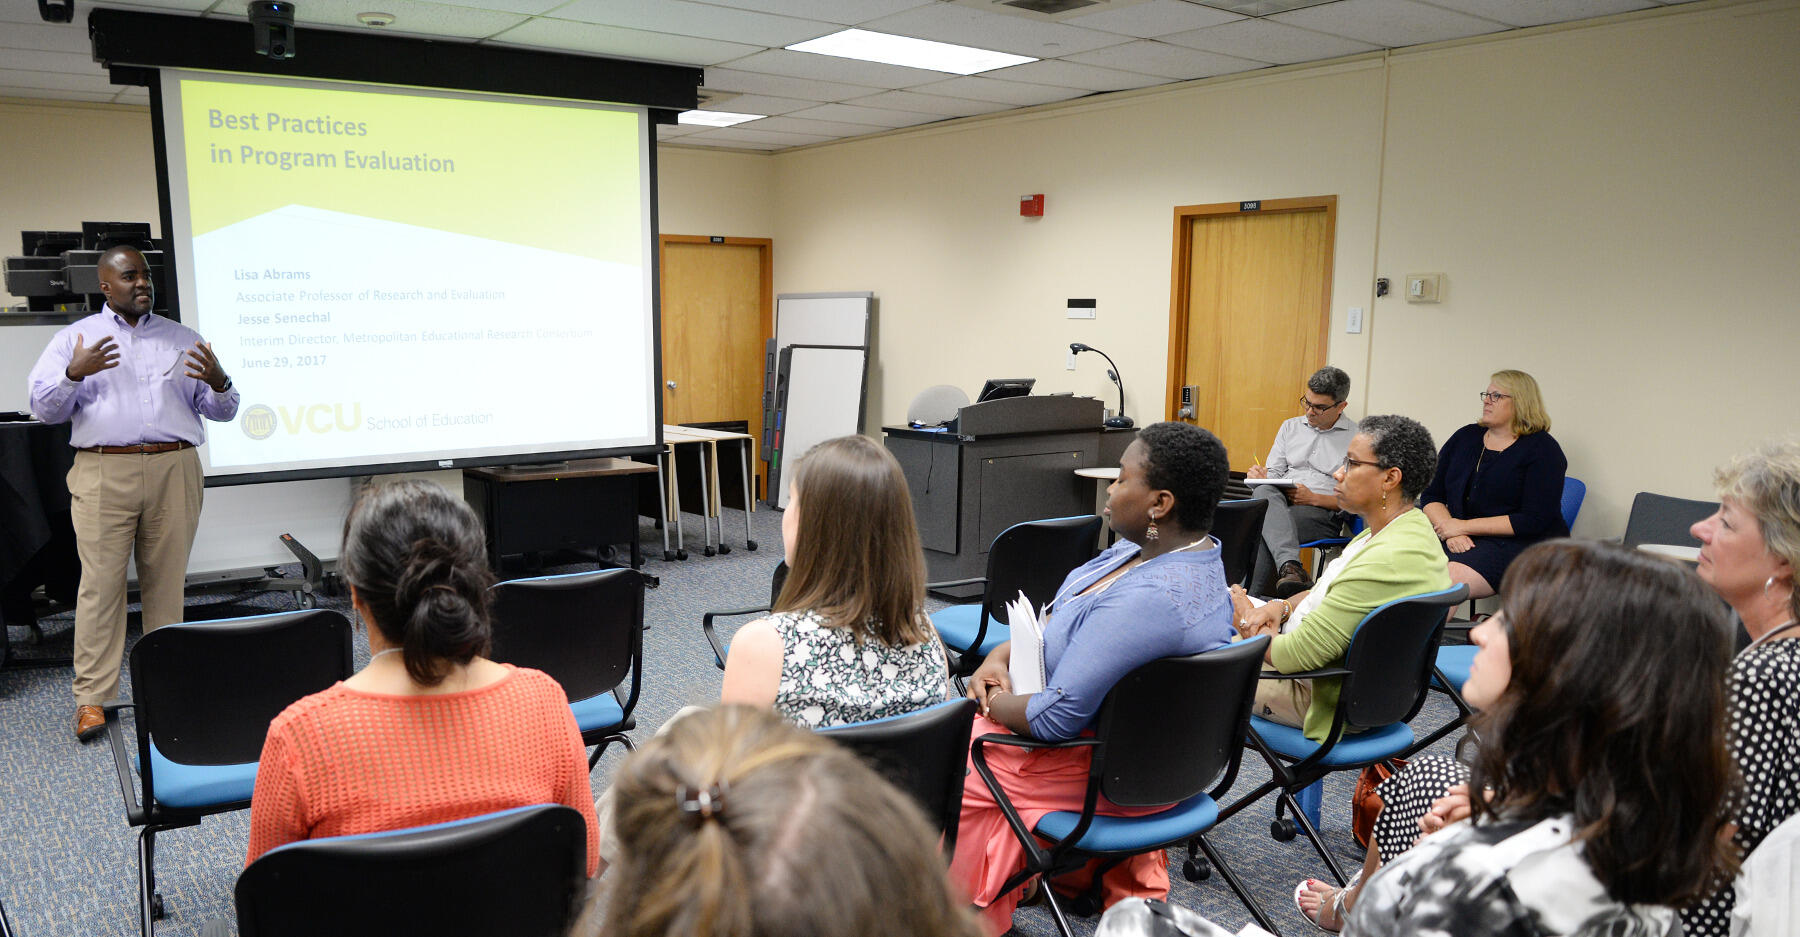 Andrew Daire, Ph.D., dean of the School of Education, welcomed the nonprofit leaders as part of a new initiative to forge partnerships between the School of Education and community organizations that serve children and families.
